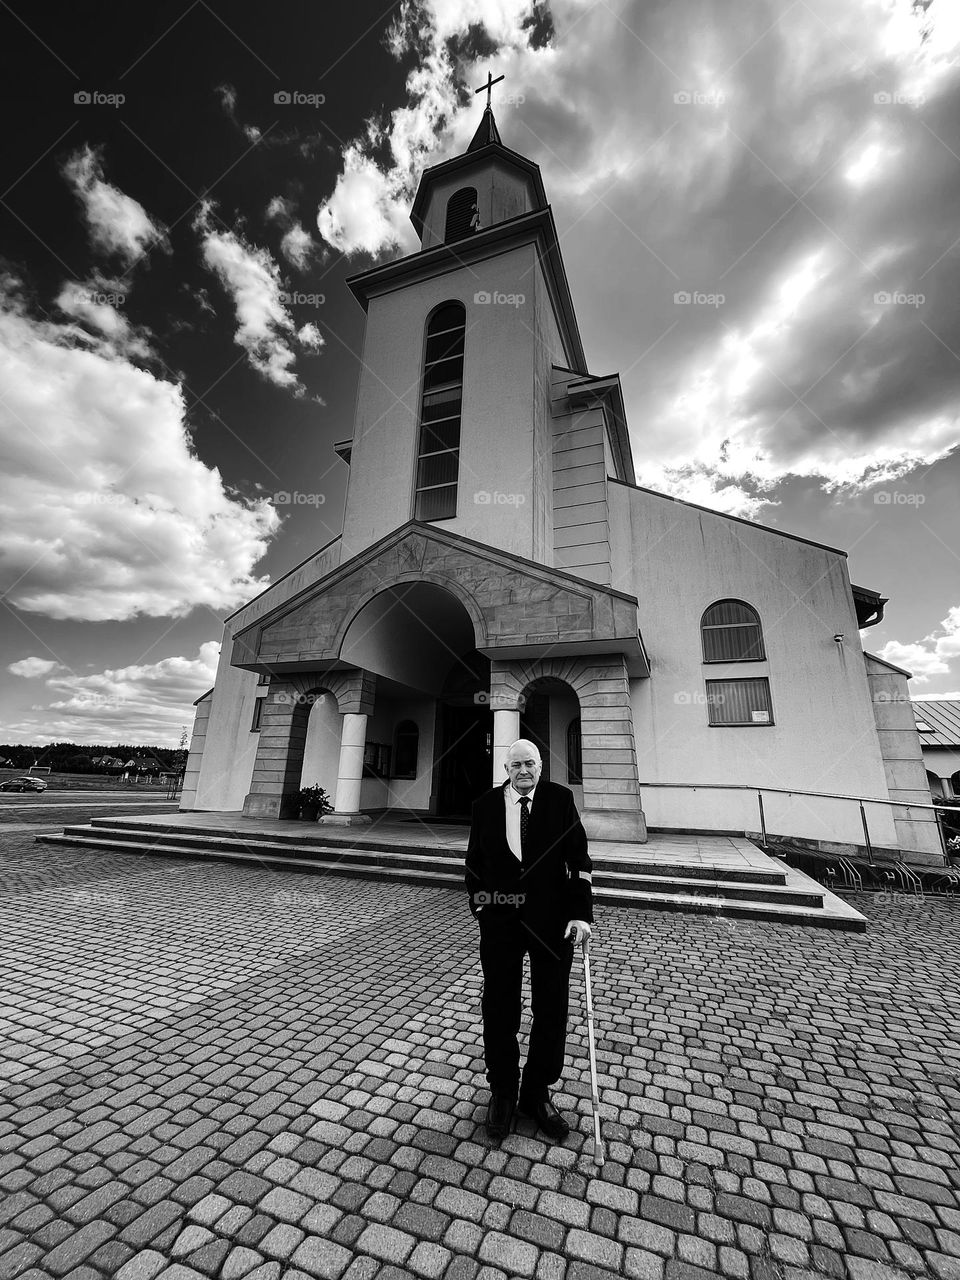 An elderly man in a suit with a crutch stands in front of a Catholic church